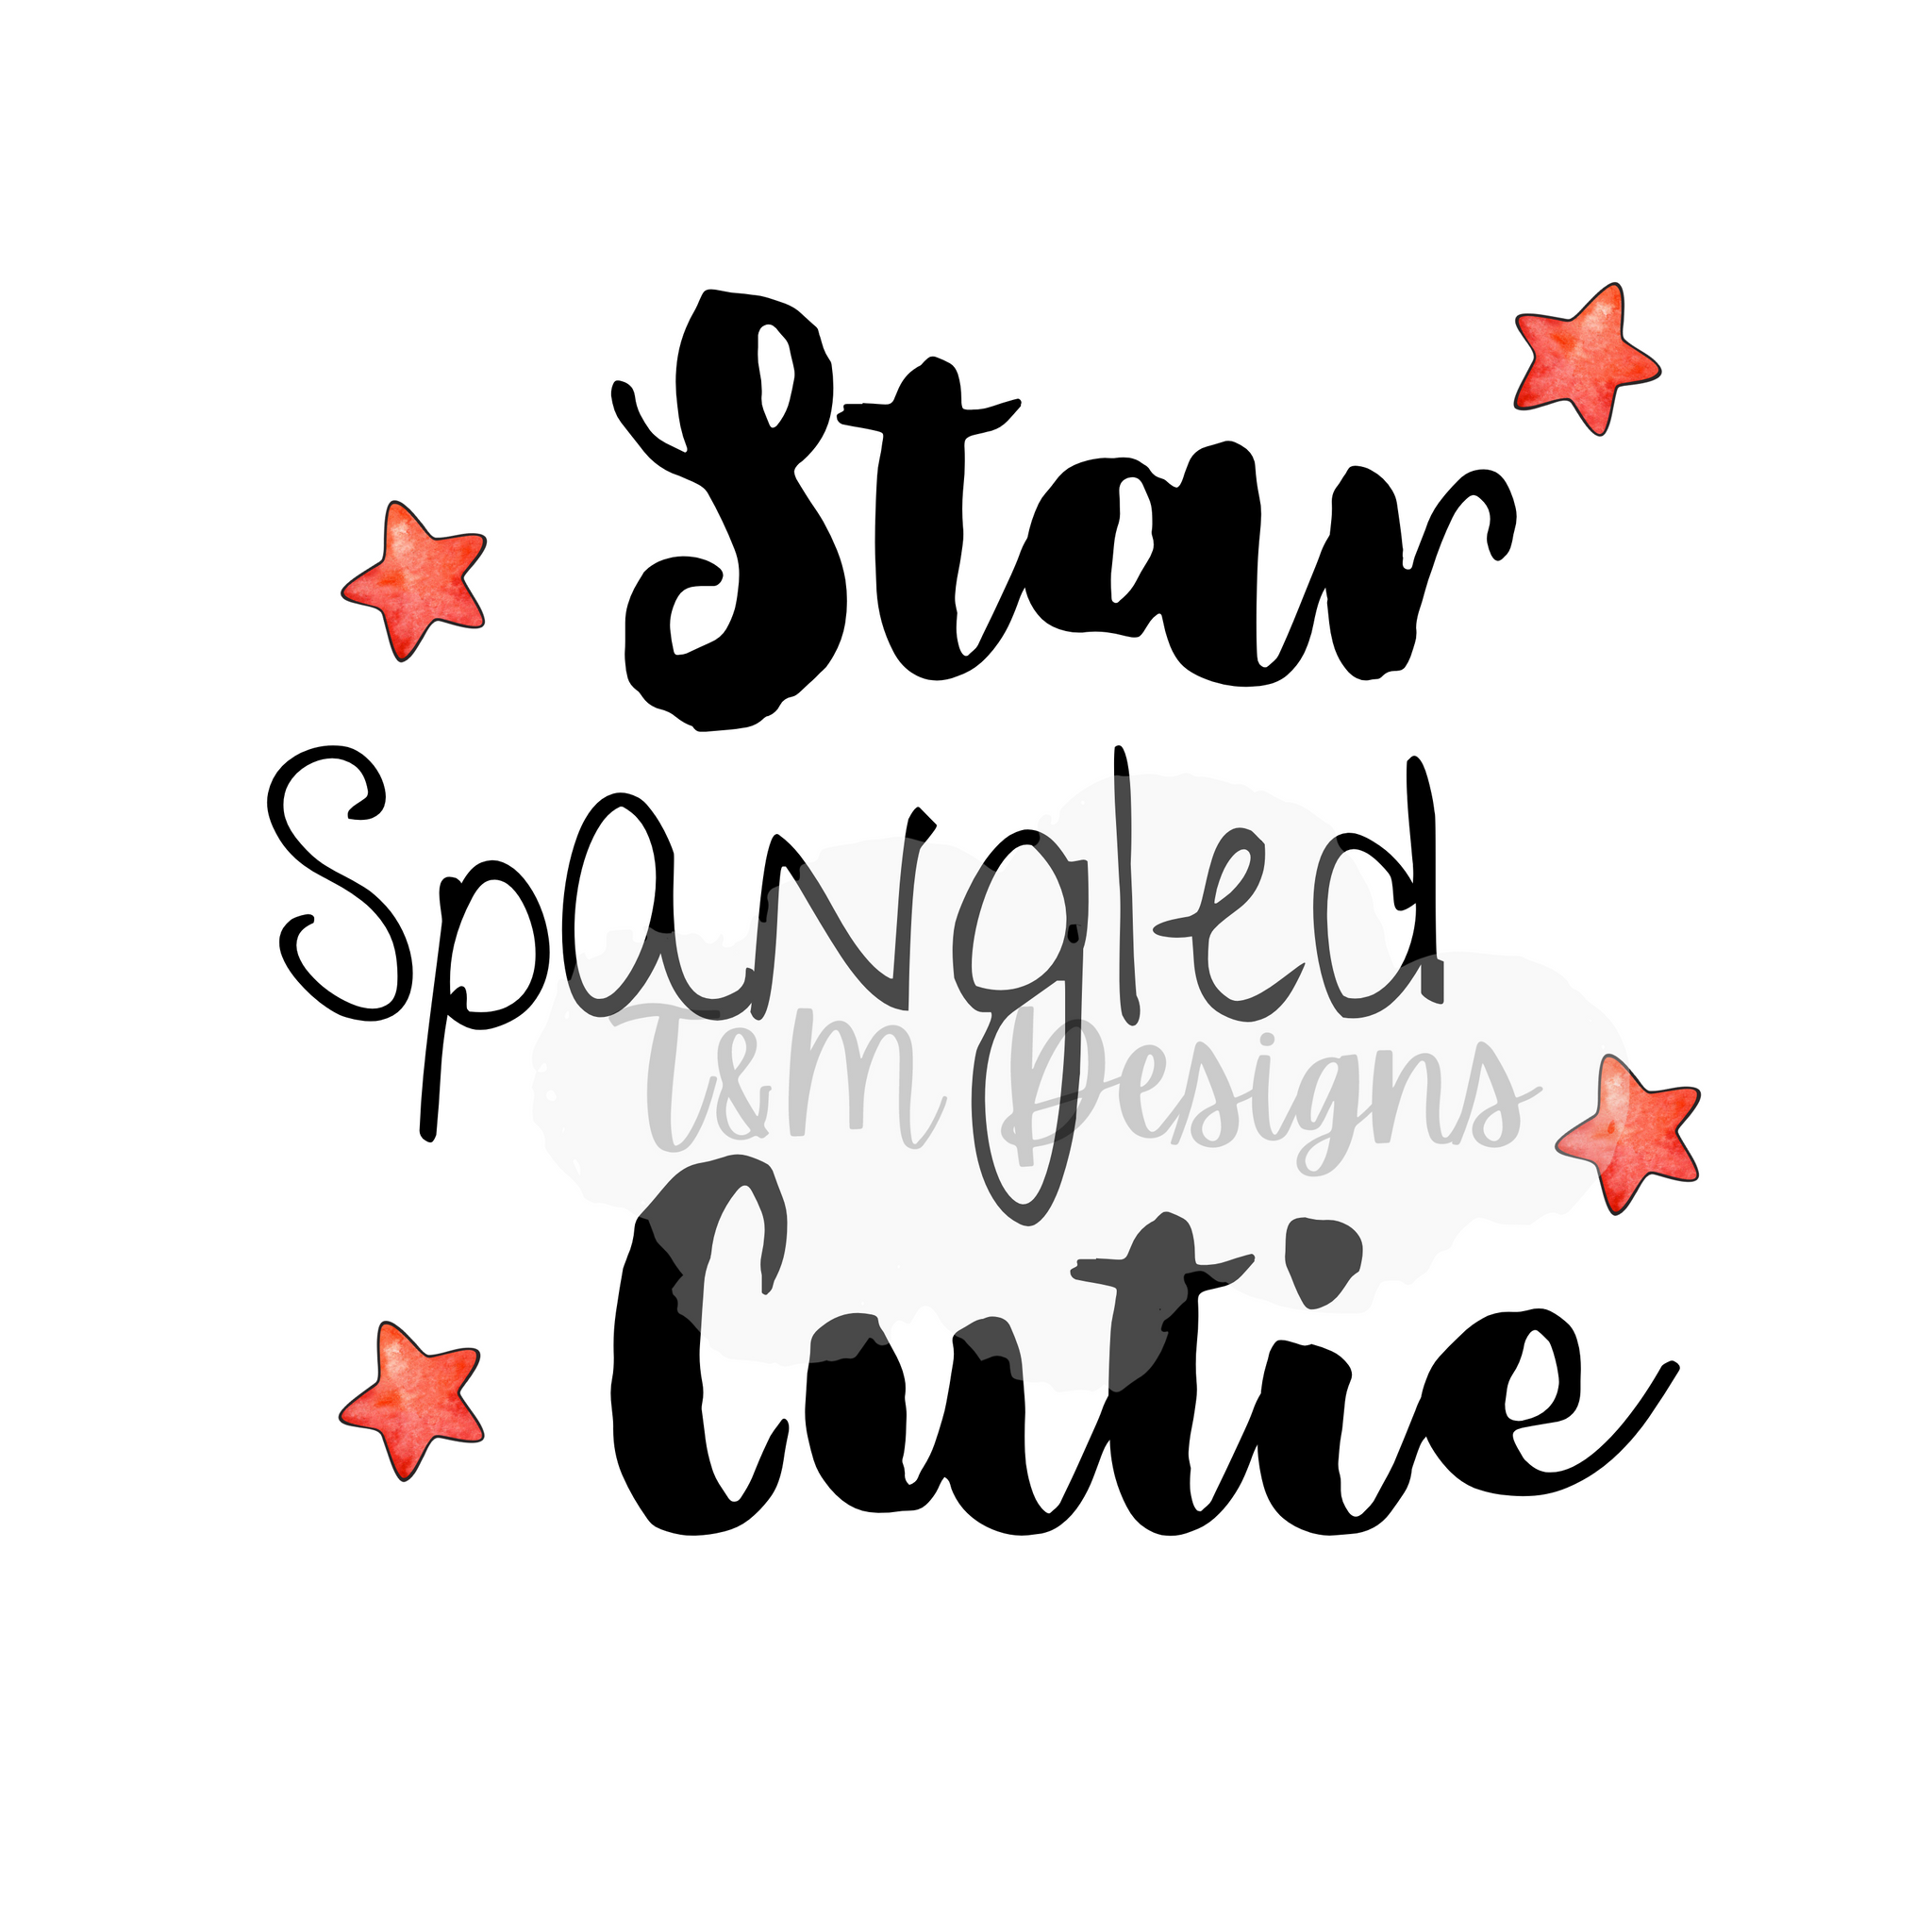 Star Spangled Cutie PNG